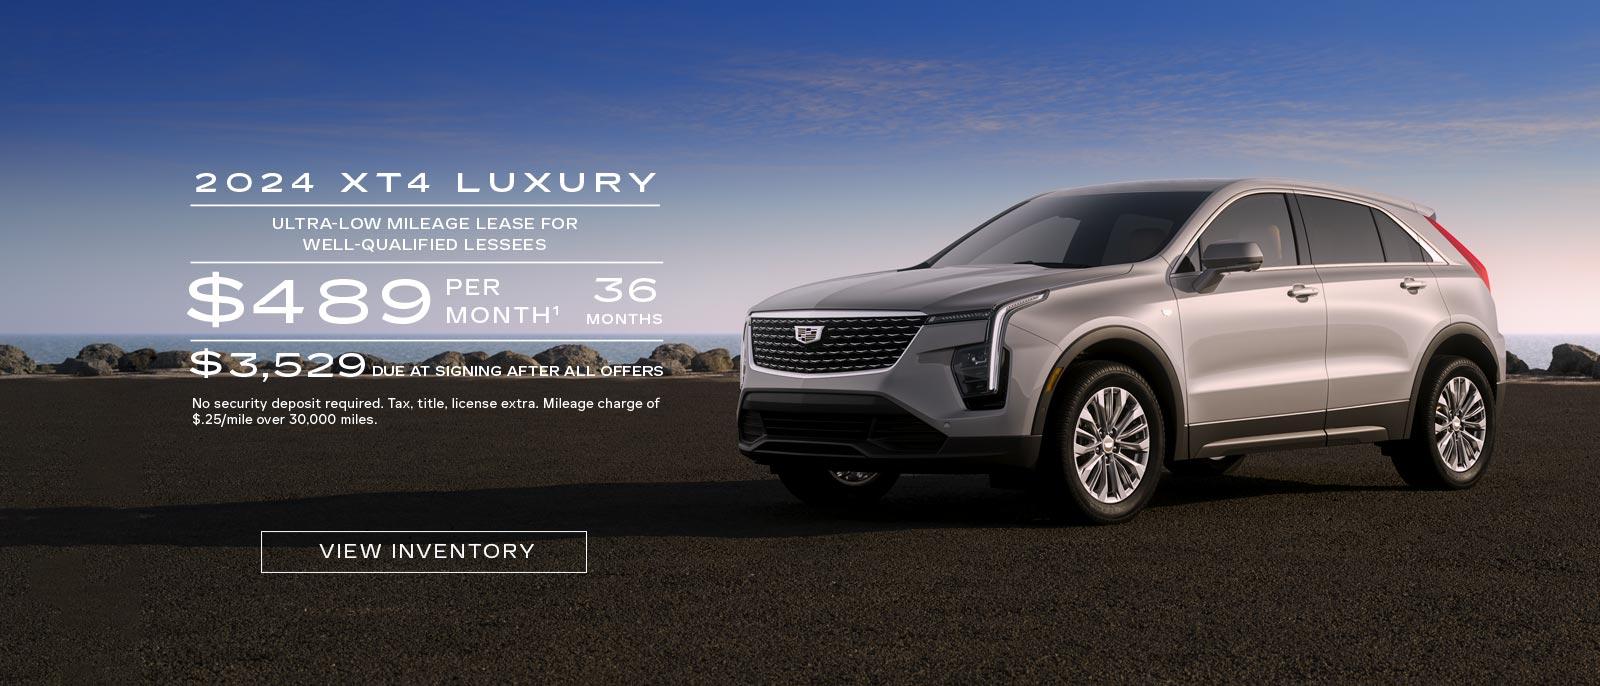 2024 XT4 Luxury. Ultra-low mileage lease for well-qualified lessees. $489 per month. 36 months. $3,529 due at signing after all offers.